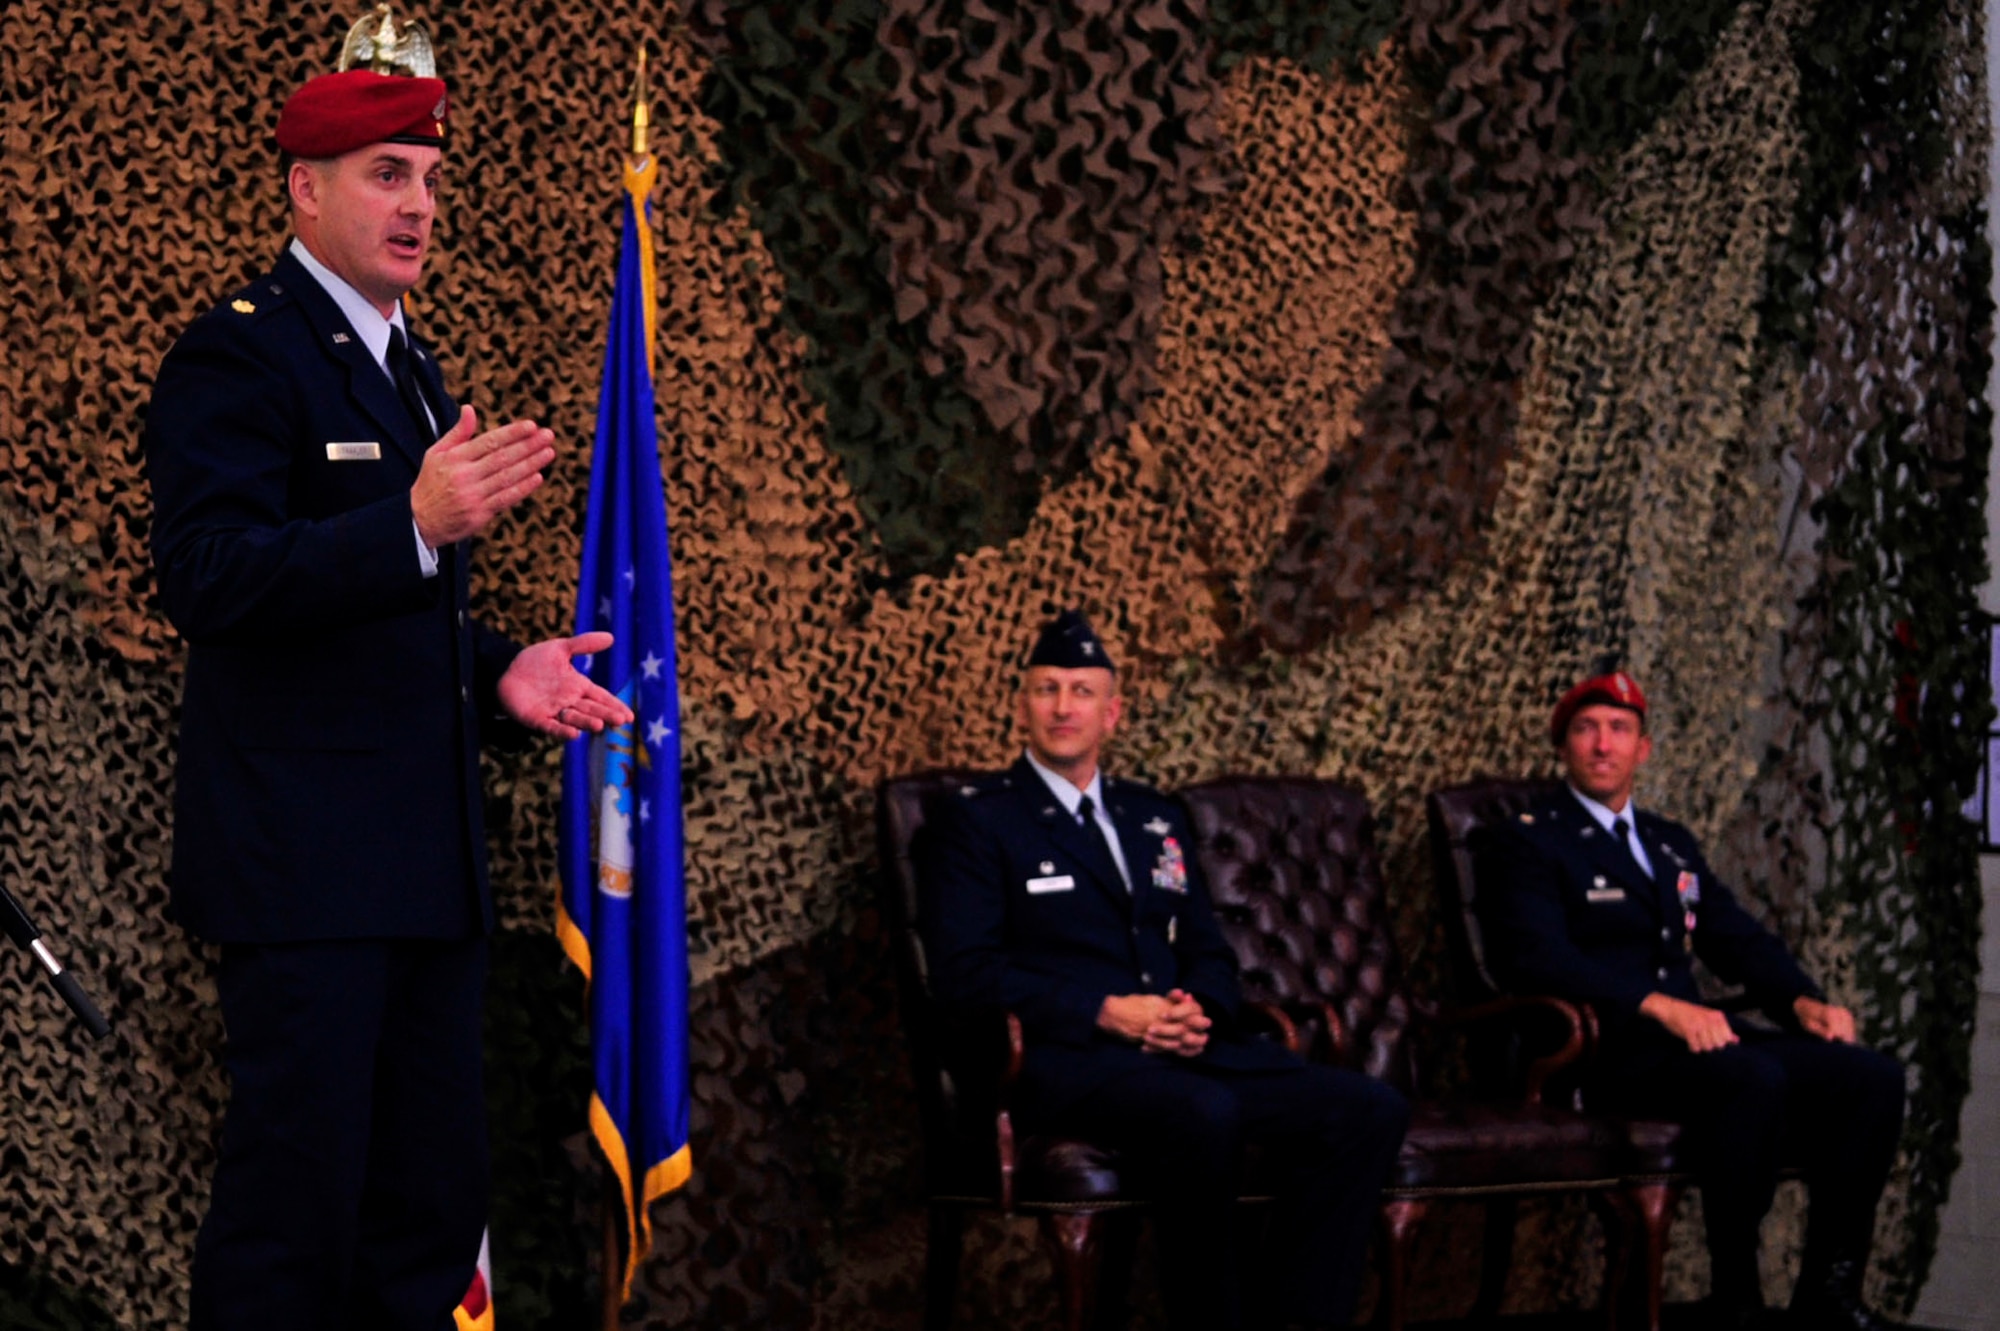 Maj. John Traxler addresses the 320th Special Tactics Squadron for the first time as the unit’s commander after a change of command ceremony May 24, 2010. 
(U.S. Air Force photo/Senior Airman Amanda Grabiec)